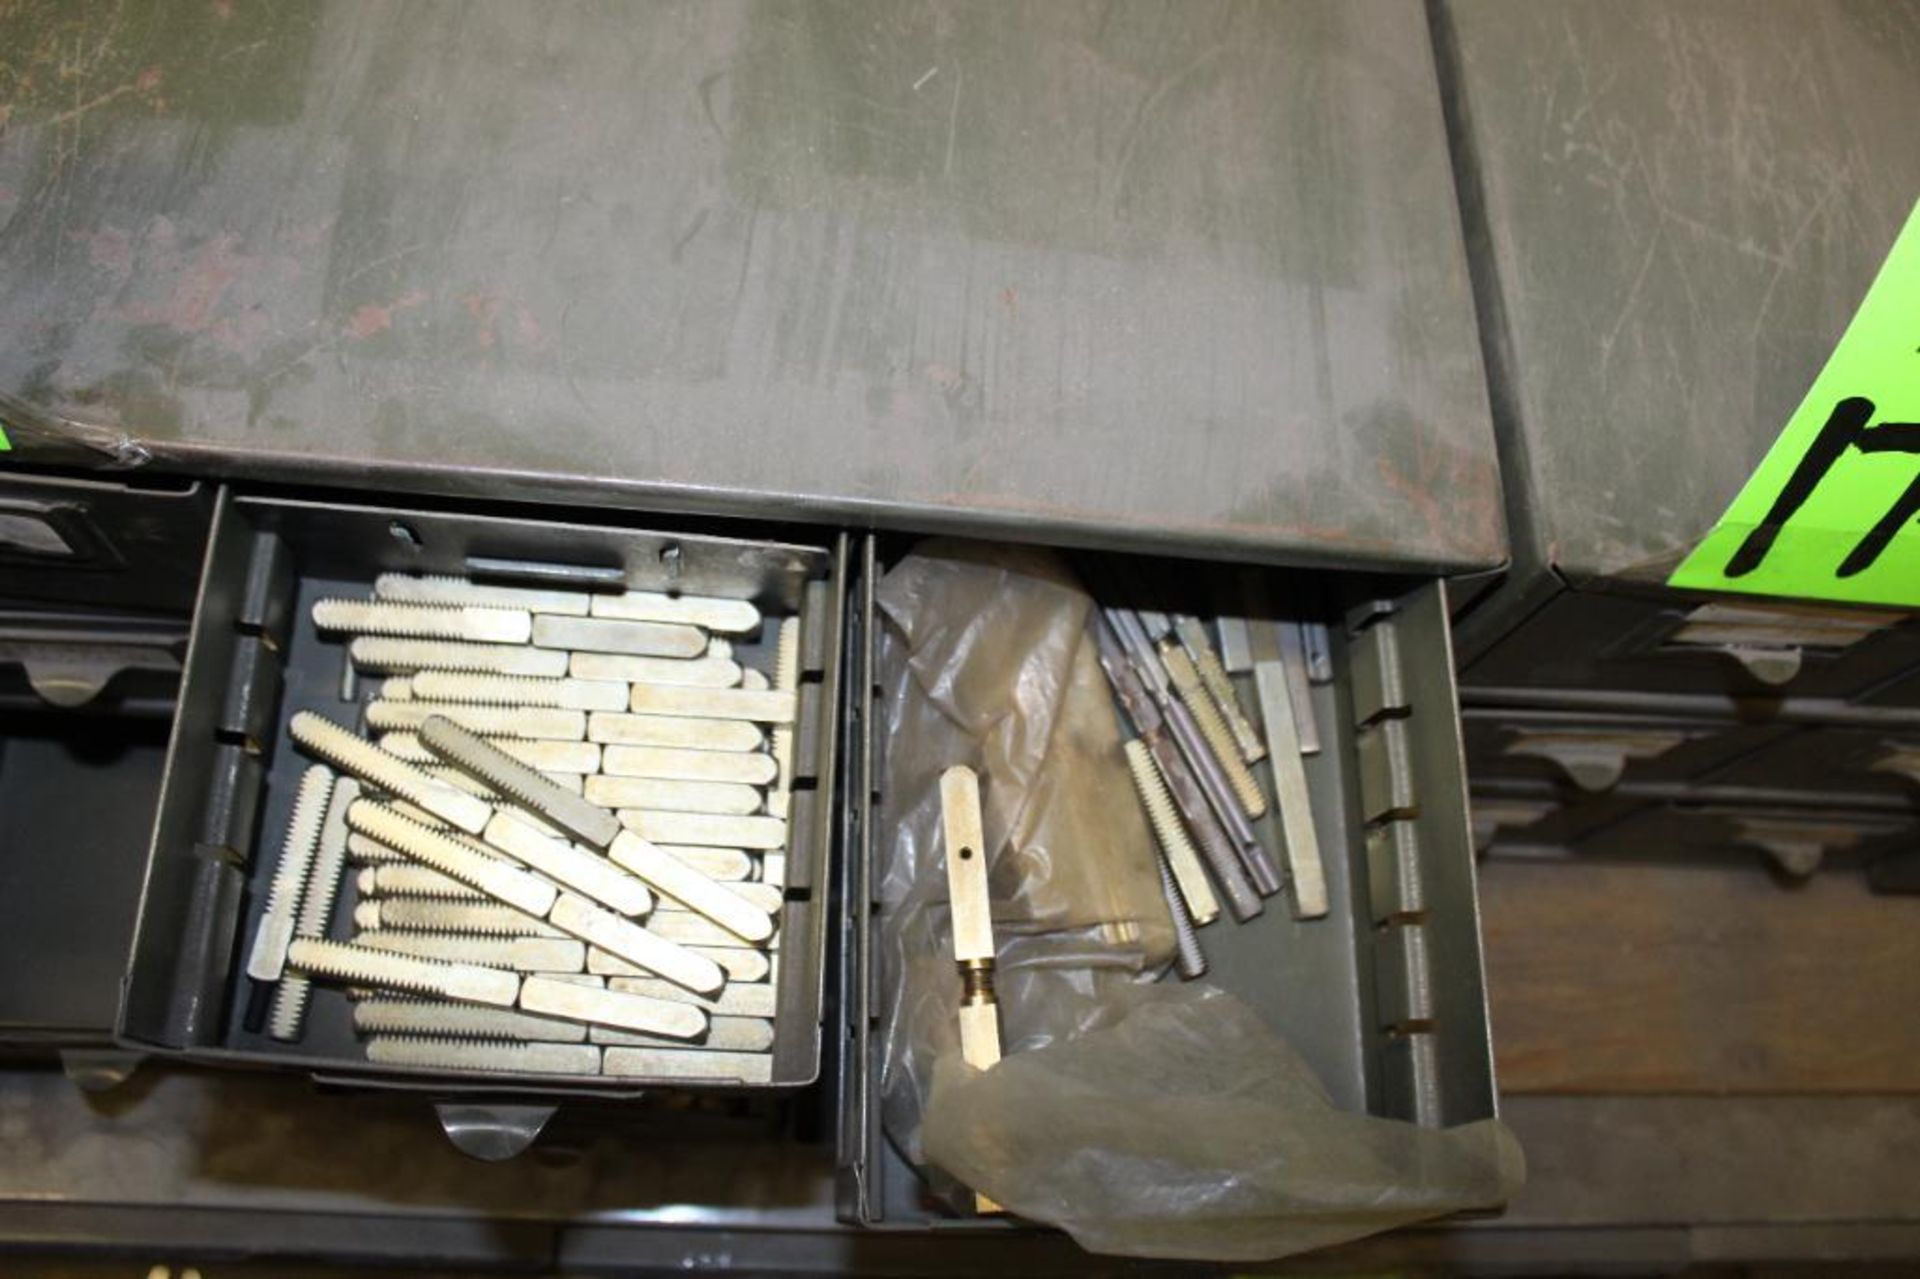 18-Drawer Organizer With Contents to Include Strikes and Spindles - Image 12 of 15